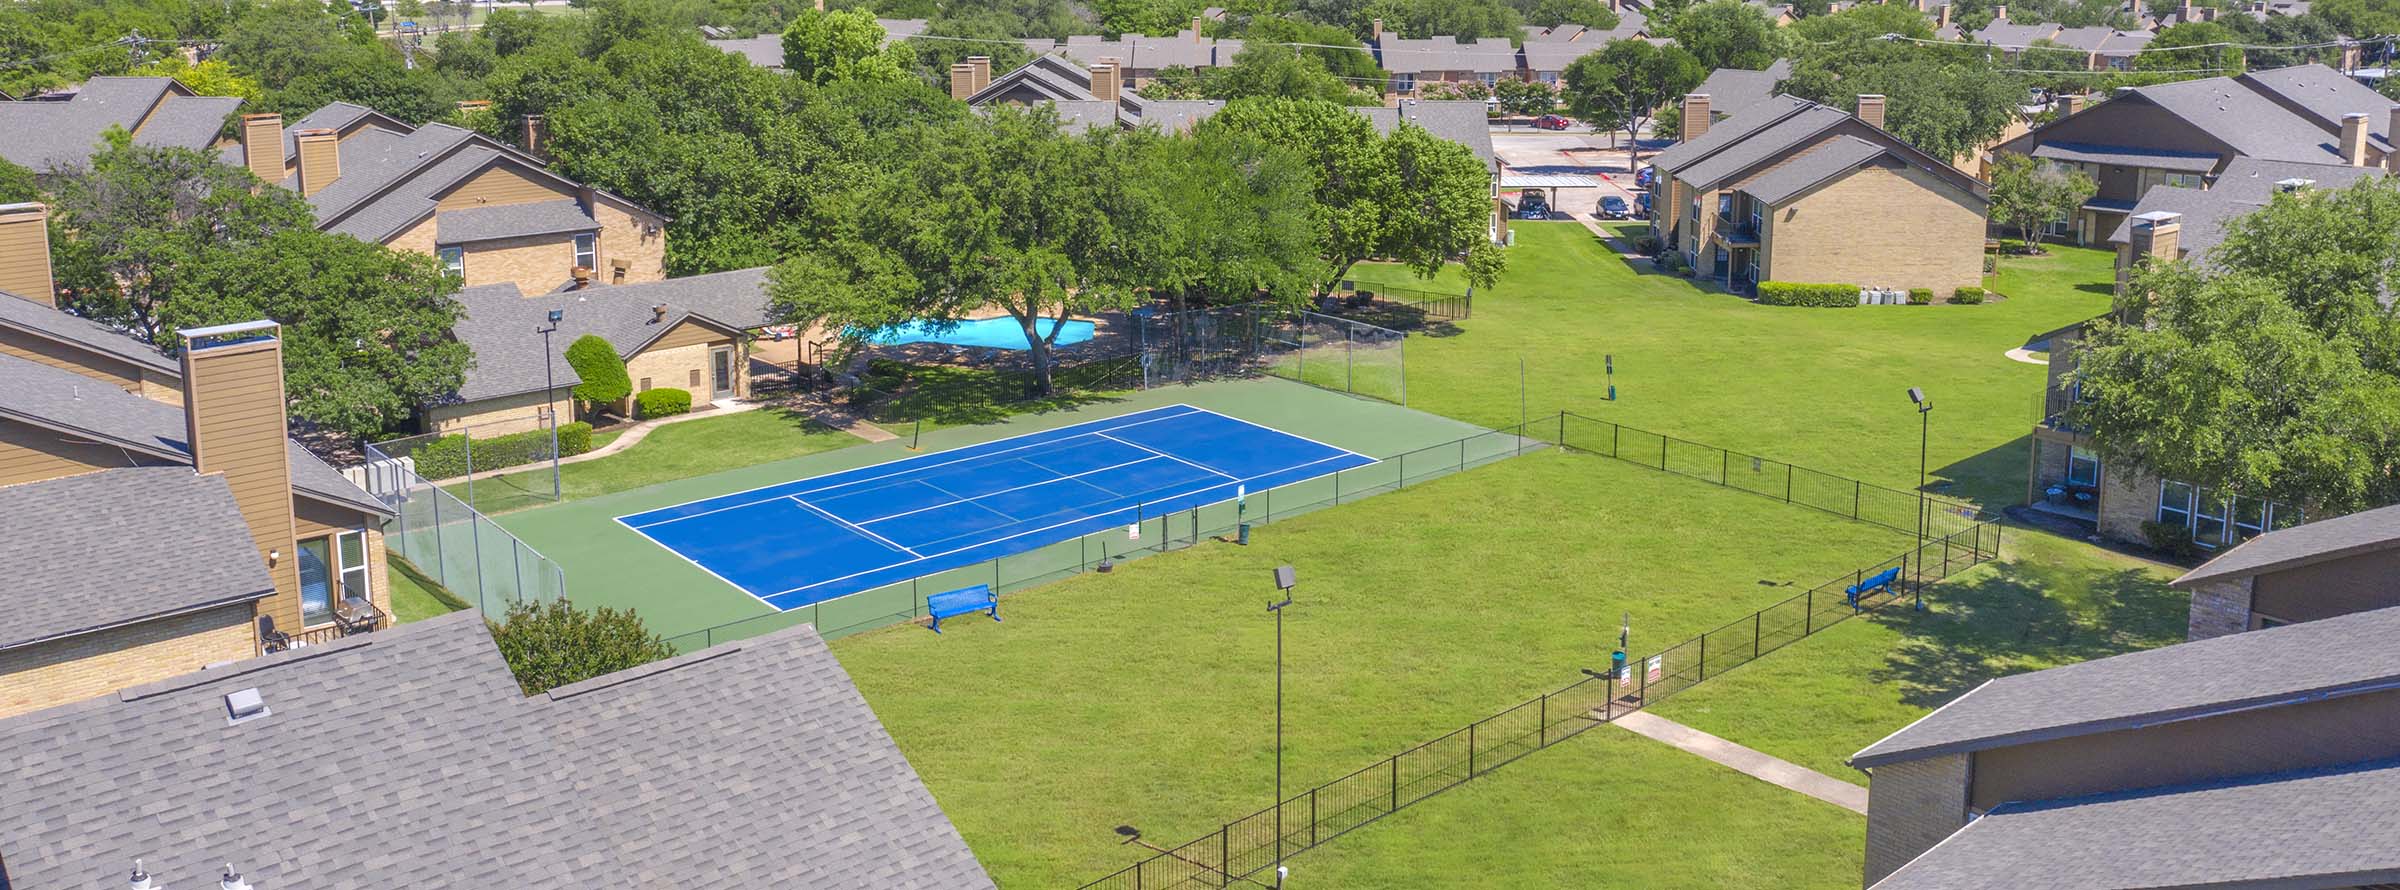 Drone shot of a tennis/ pickleball court that is nearby a pet playground.